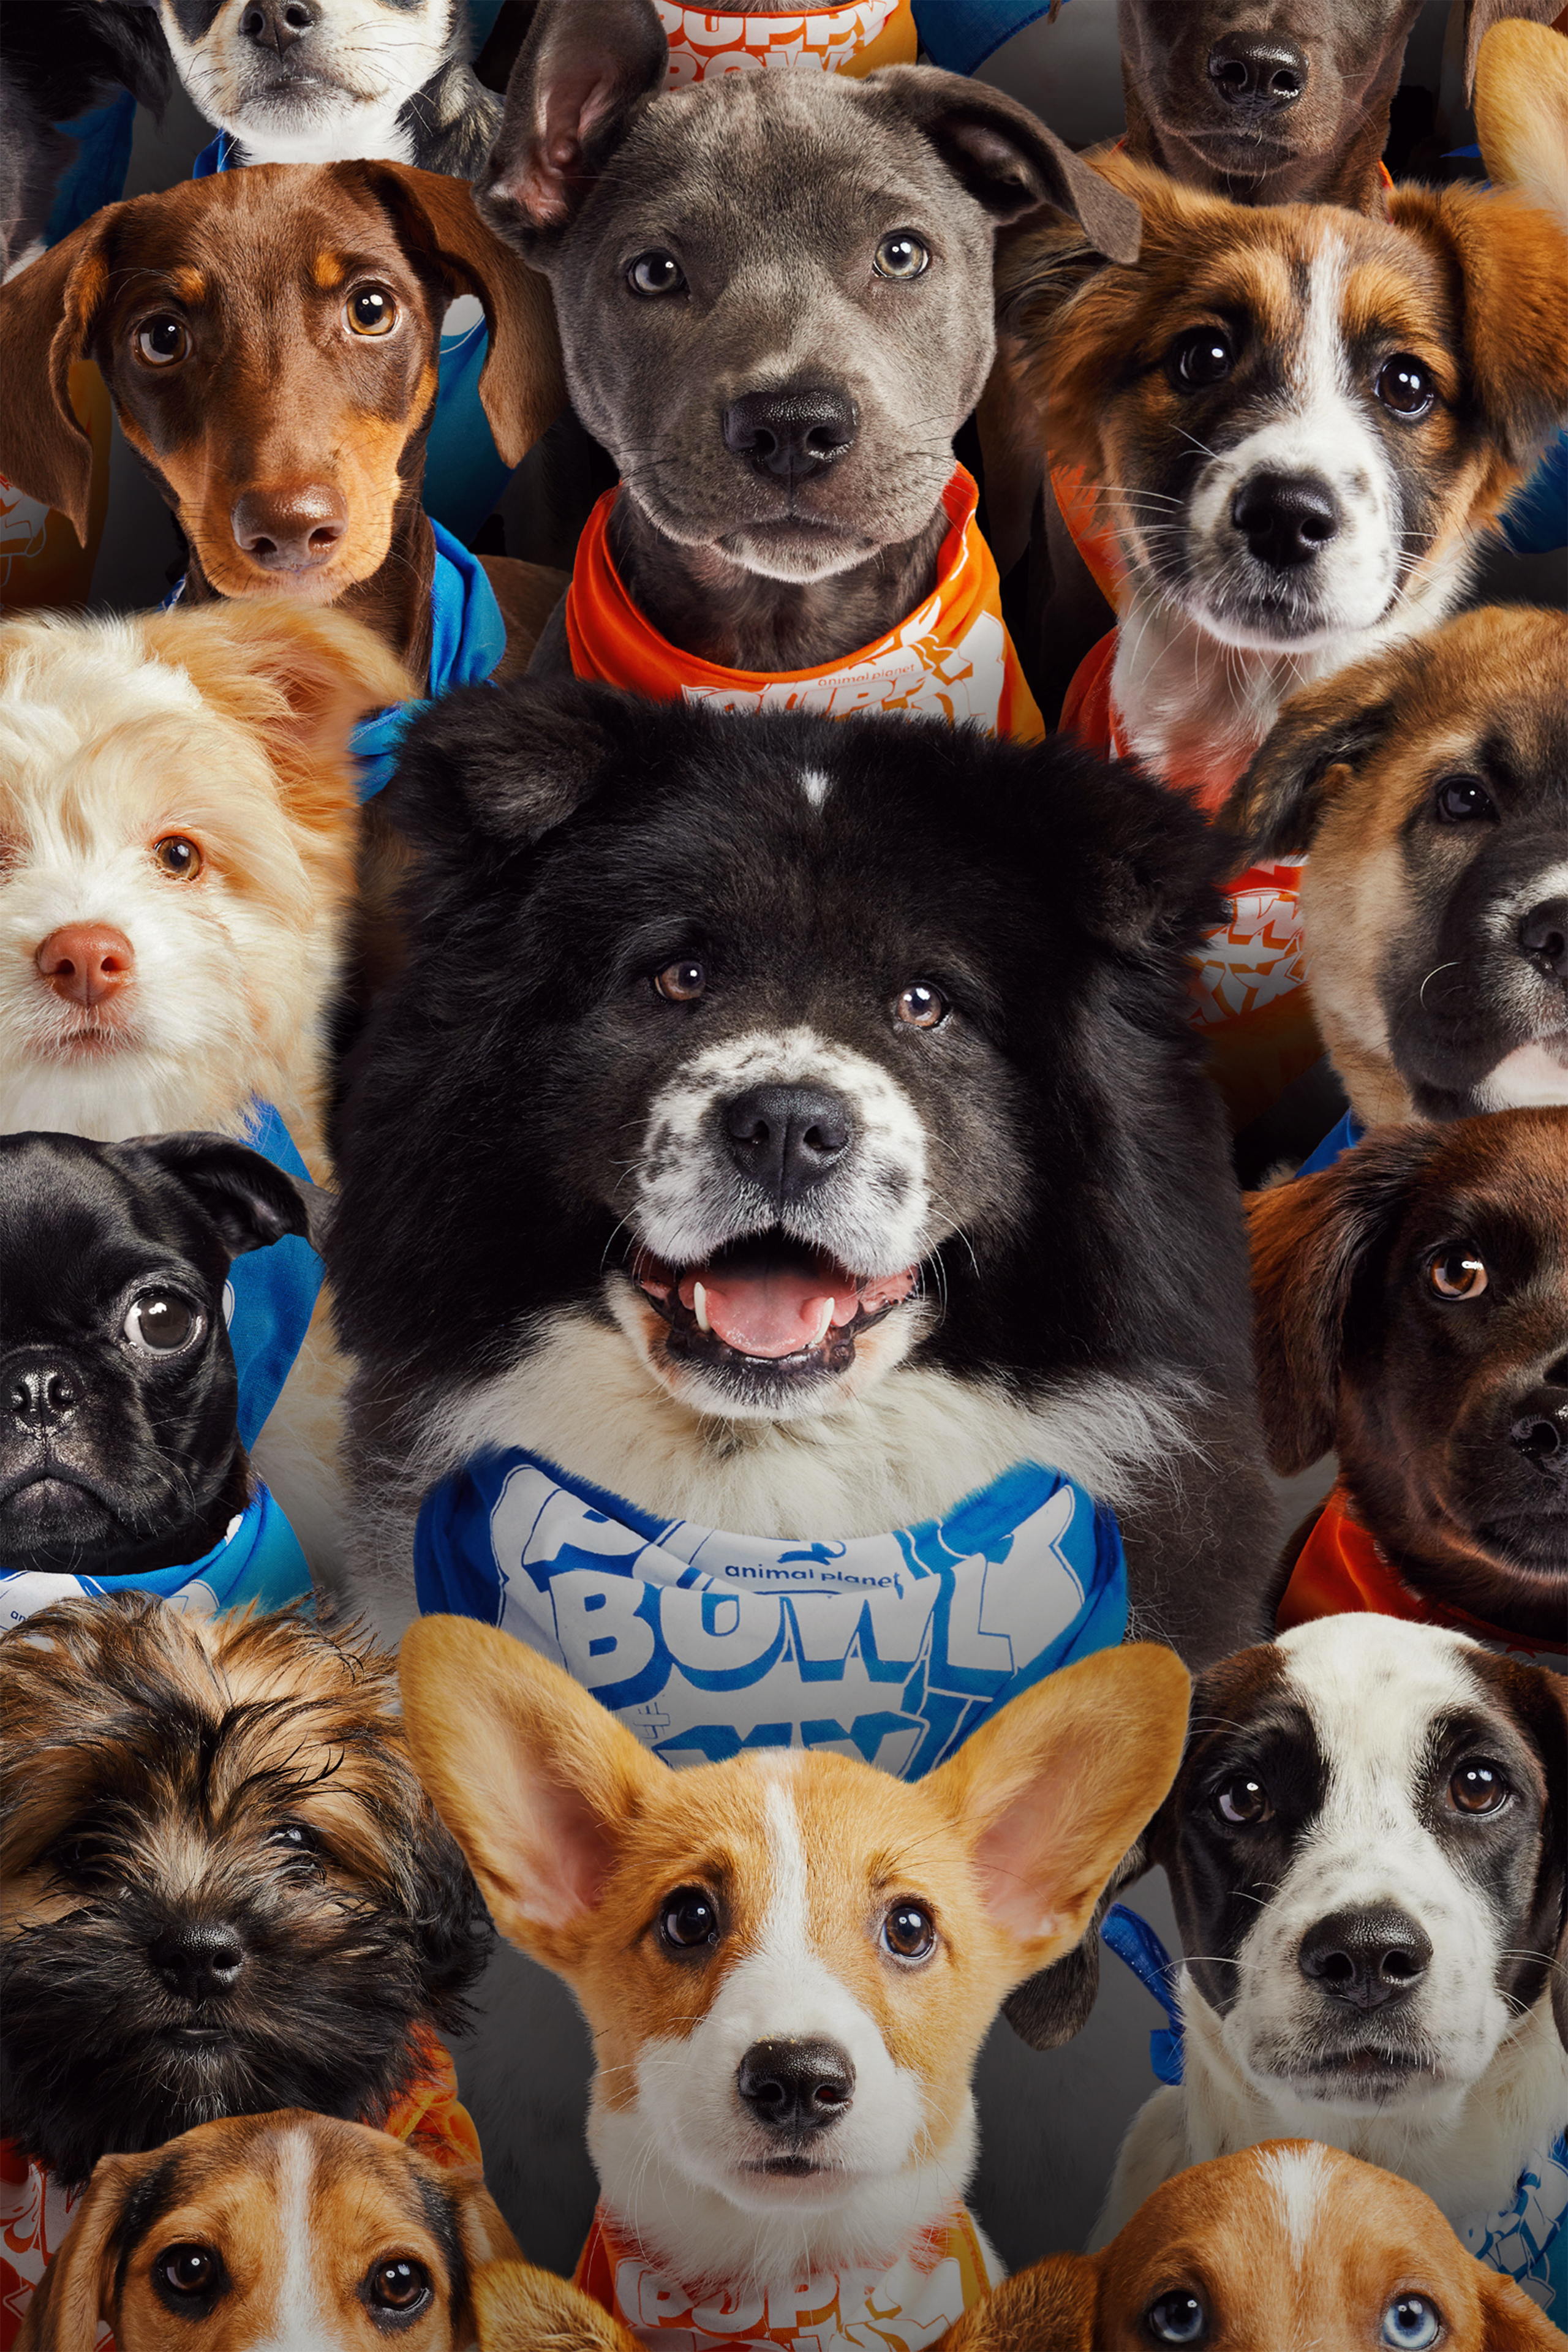 4 Pet-Themed Movie Types to Watch with Your Furry Friends